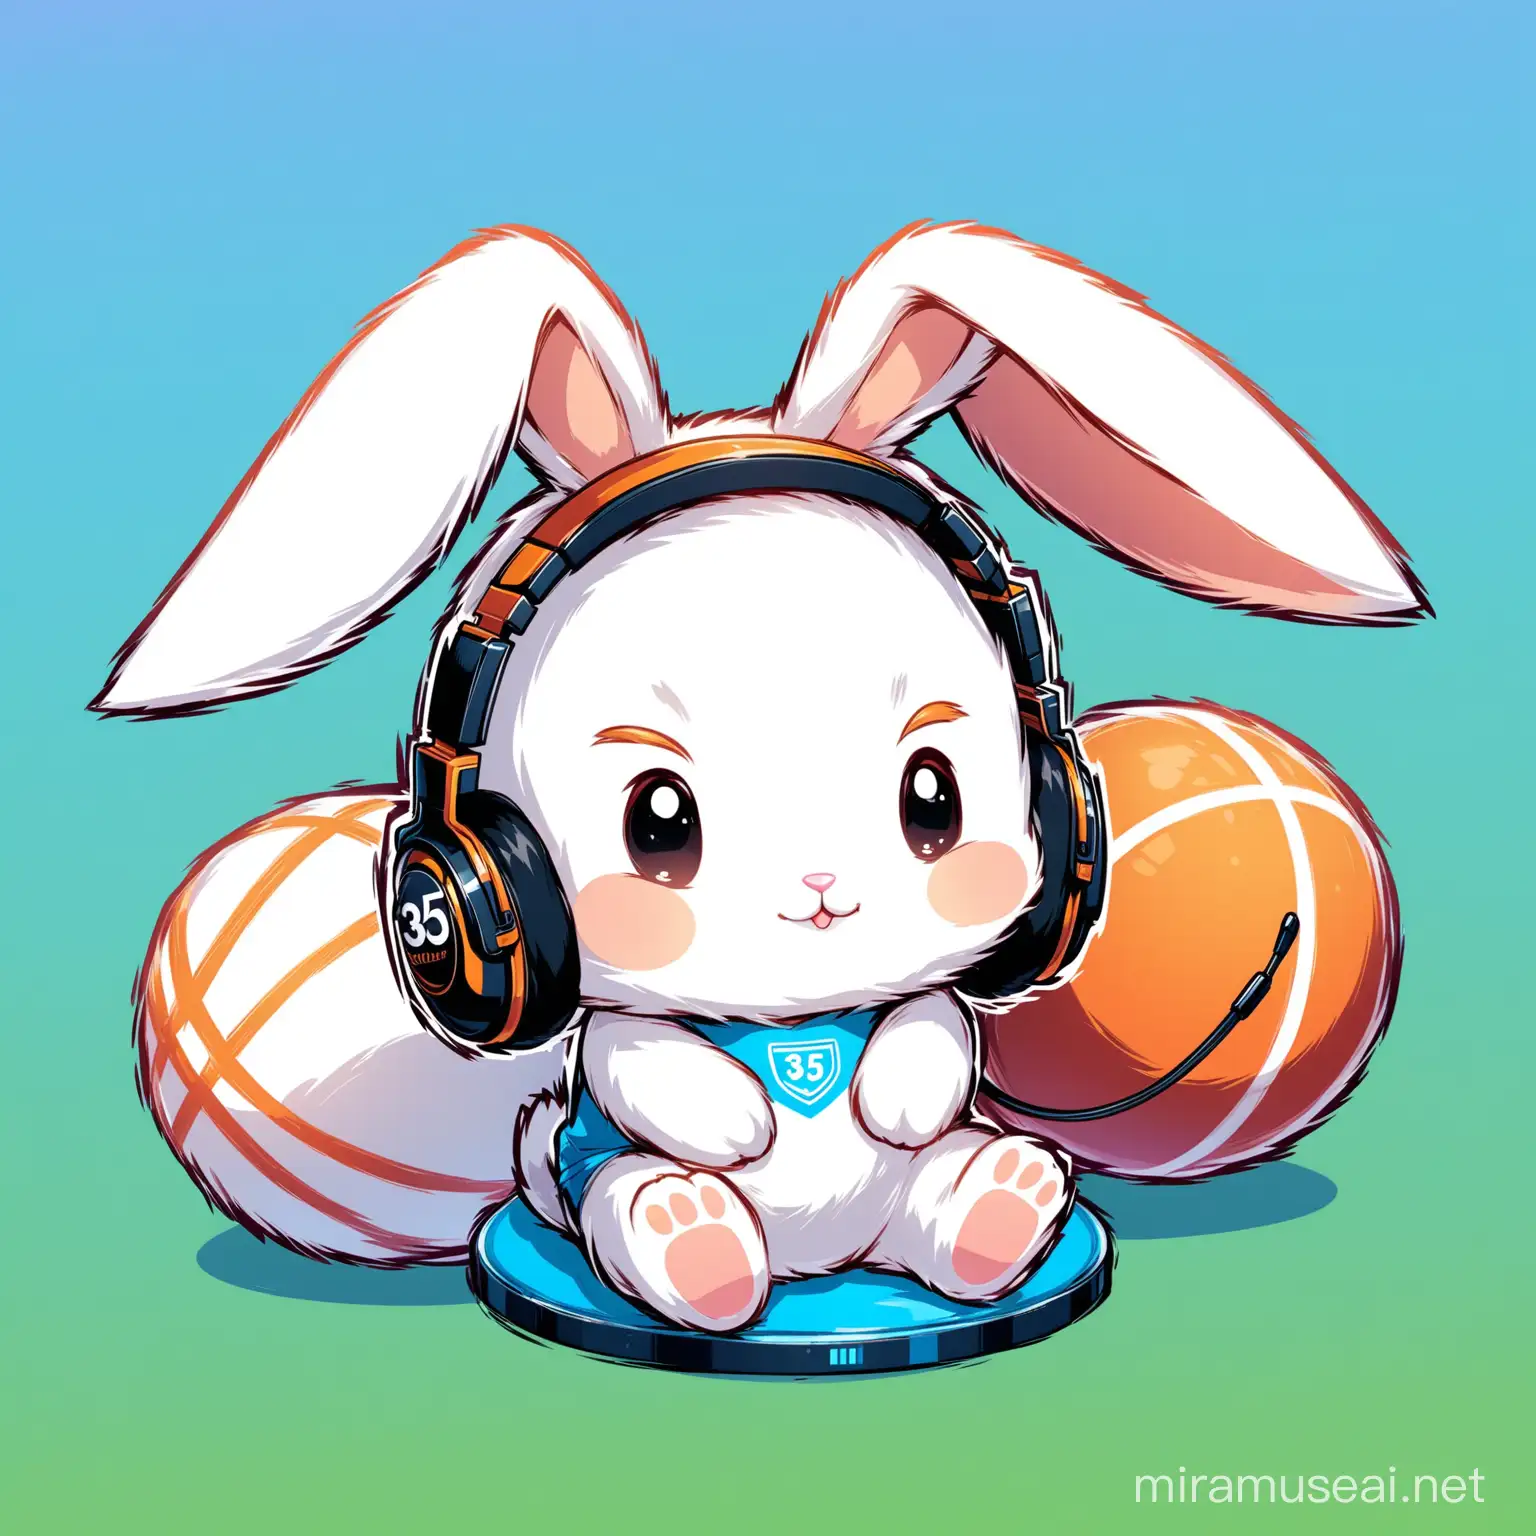 Sporty Bunny Mascot Wearing Headphones on a Caster